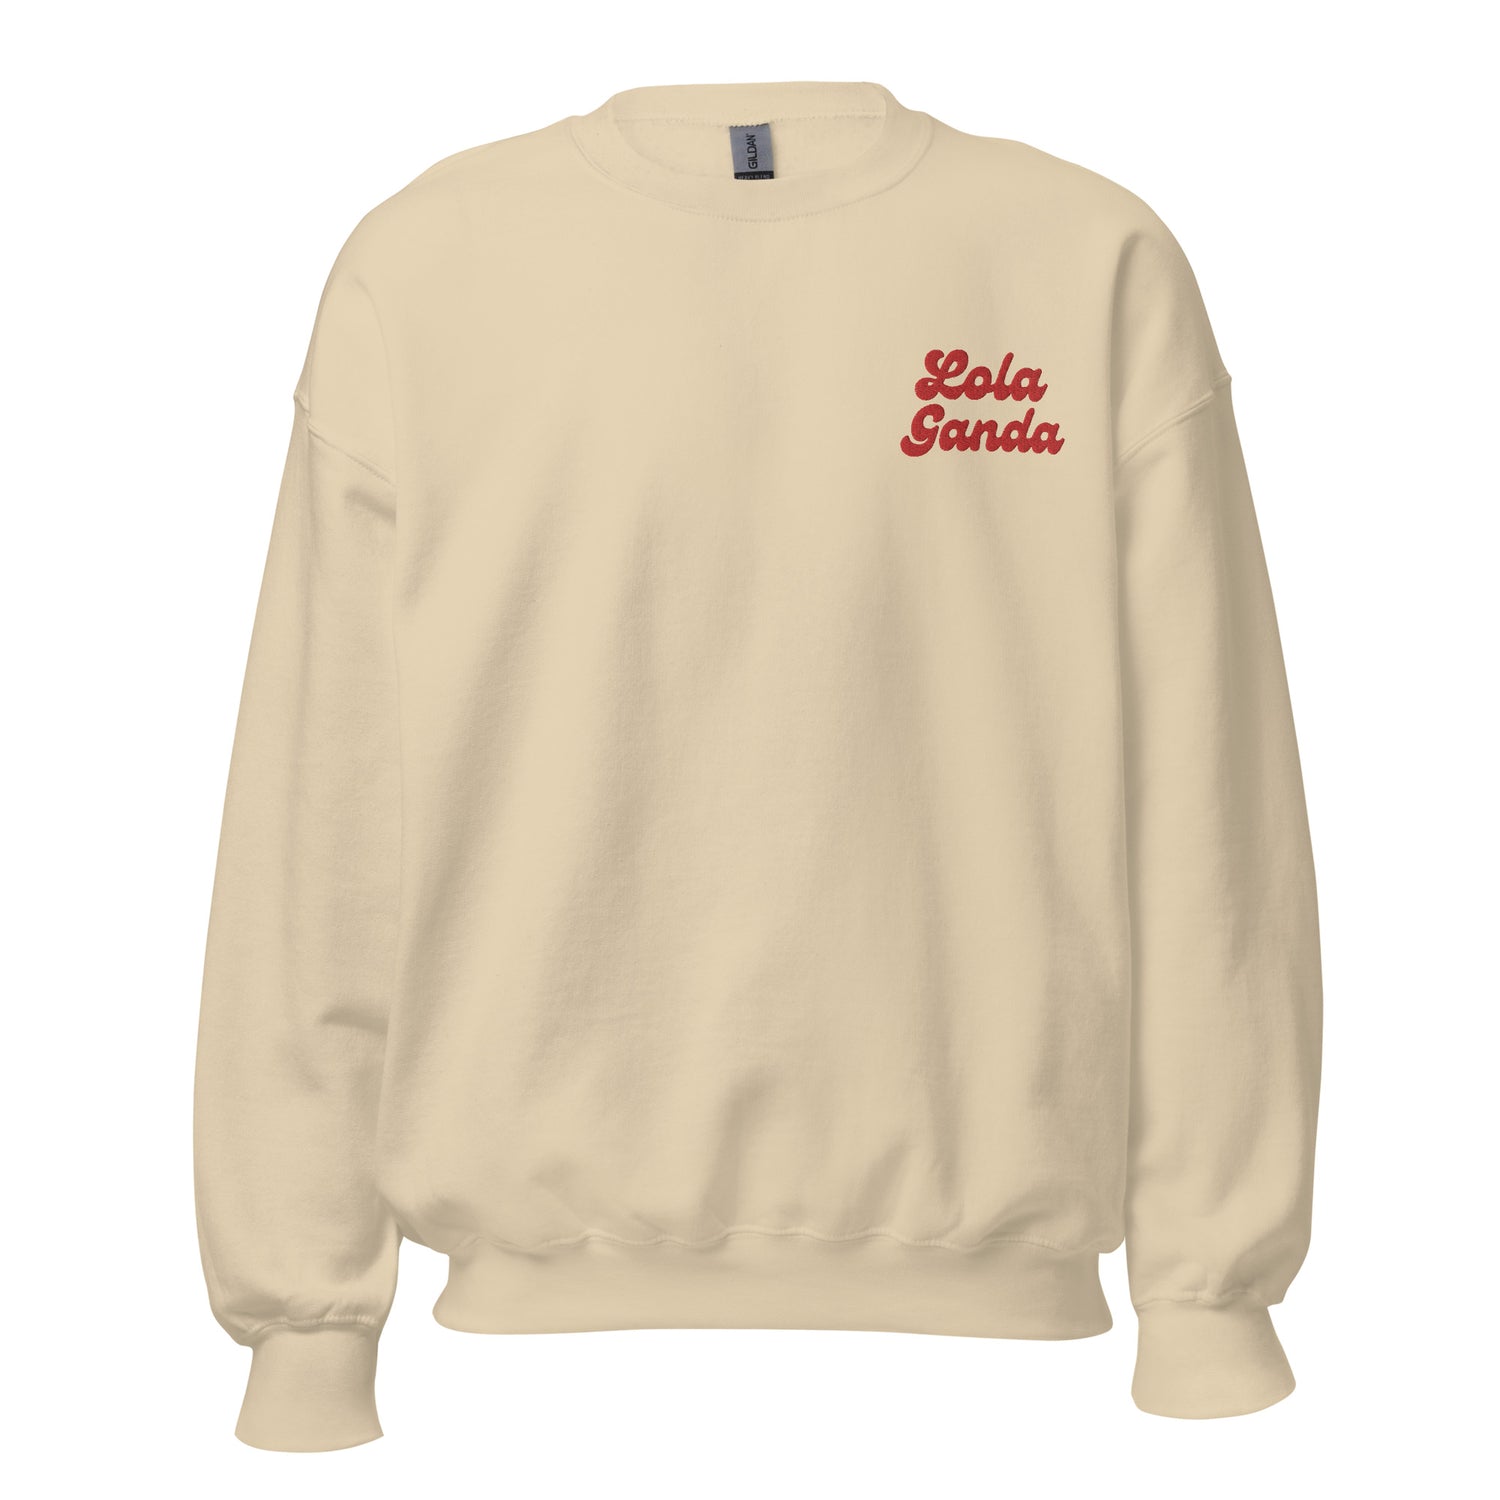 Filipino Sweatshirt Crew Neck Lola Ganda Grandmother Embroidered Mother's Day Gift in color variant Sand